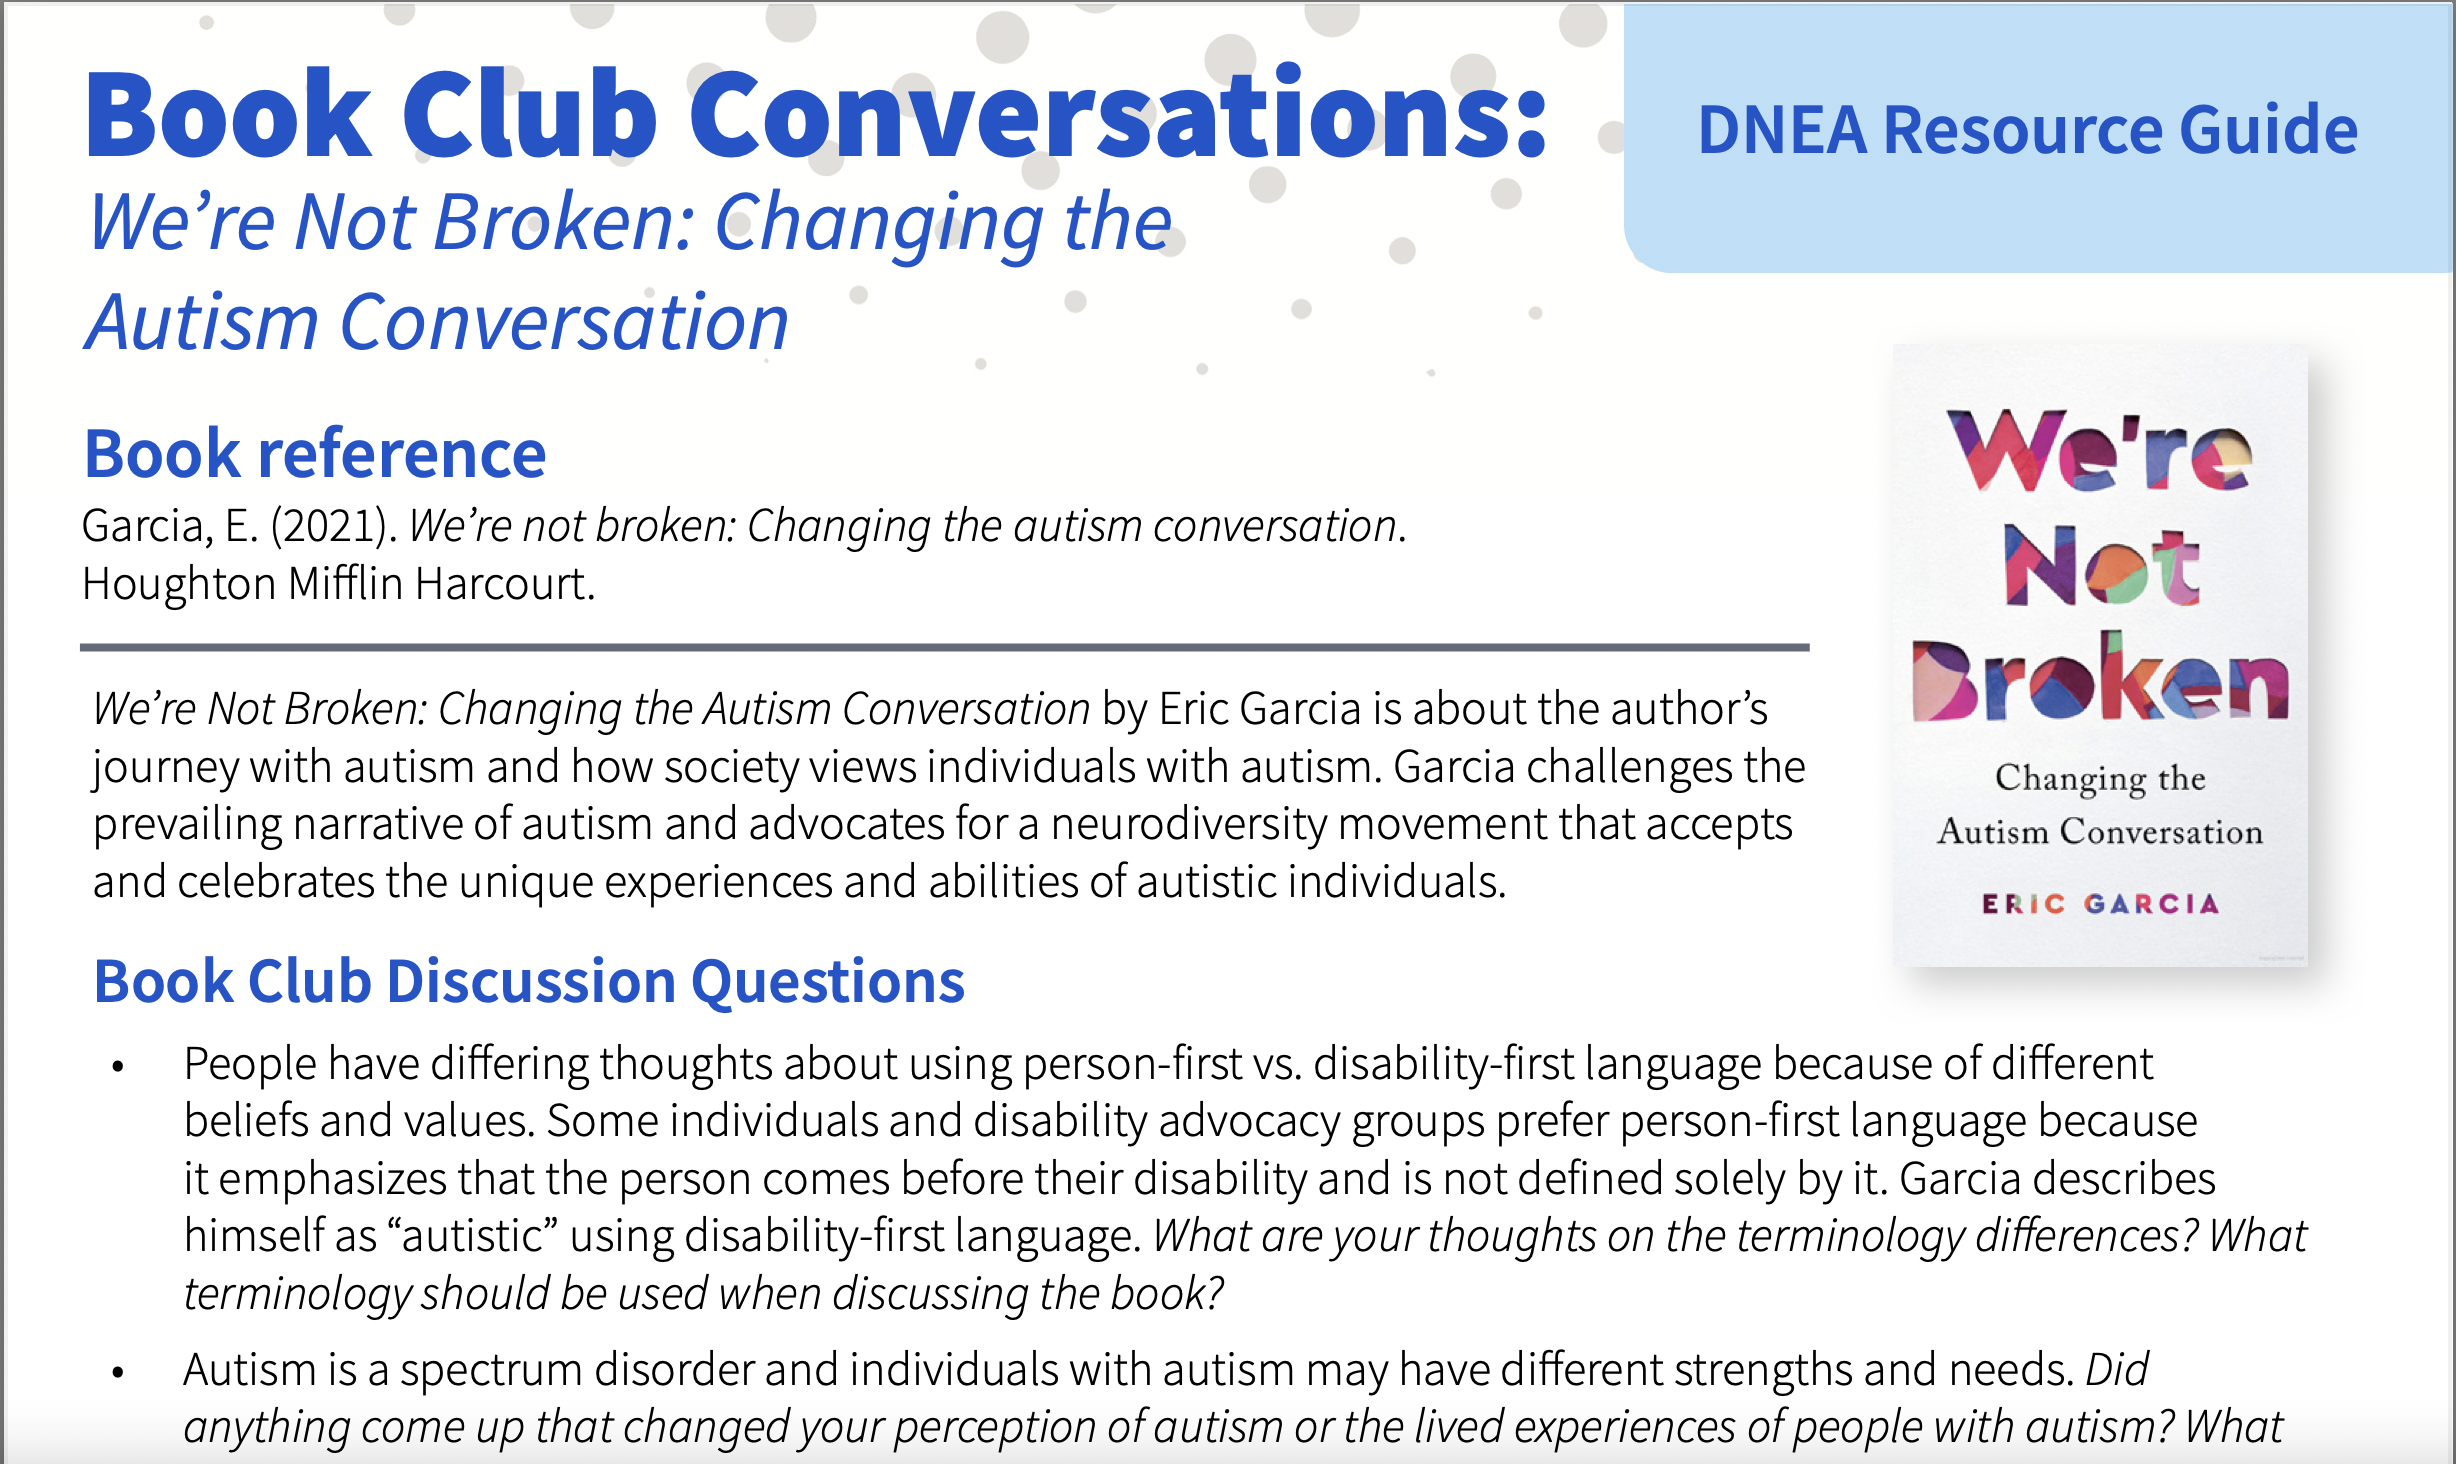 Bookclub- We're Not Broken: Changing the Autism Conversation